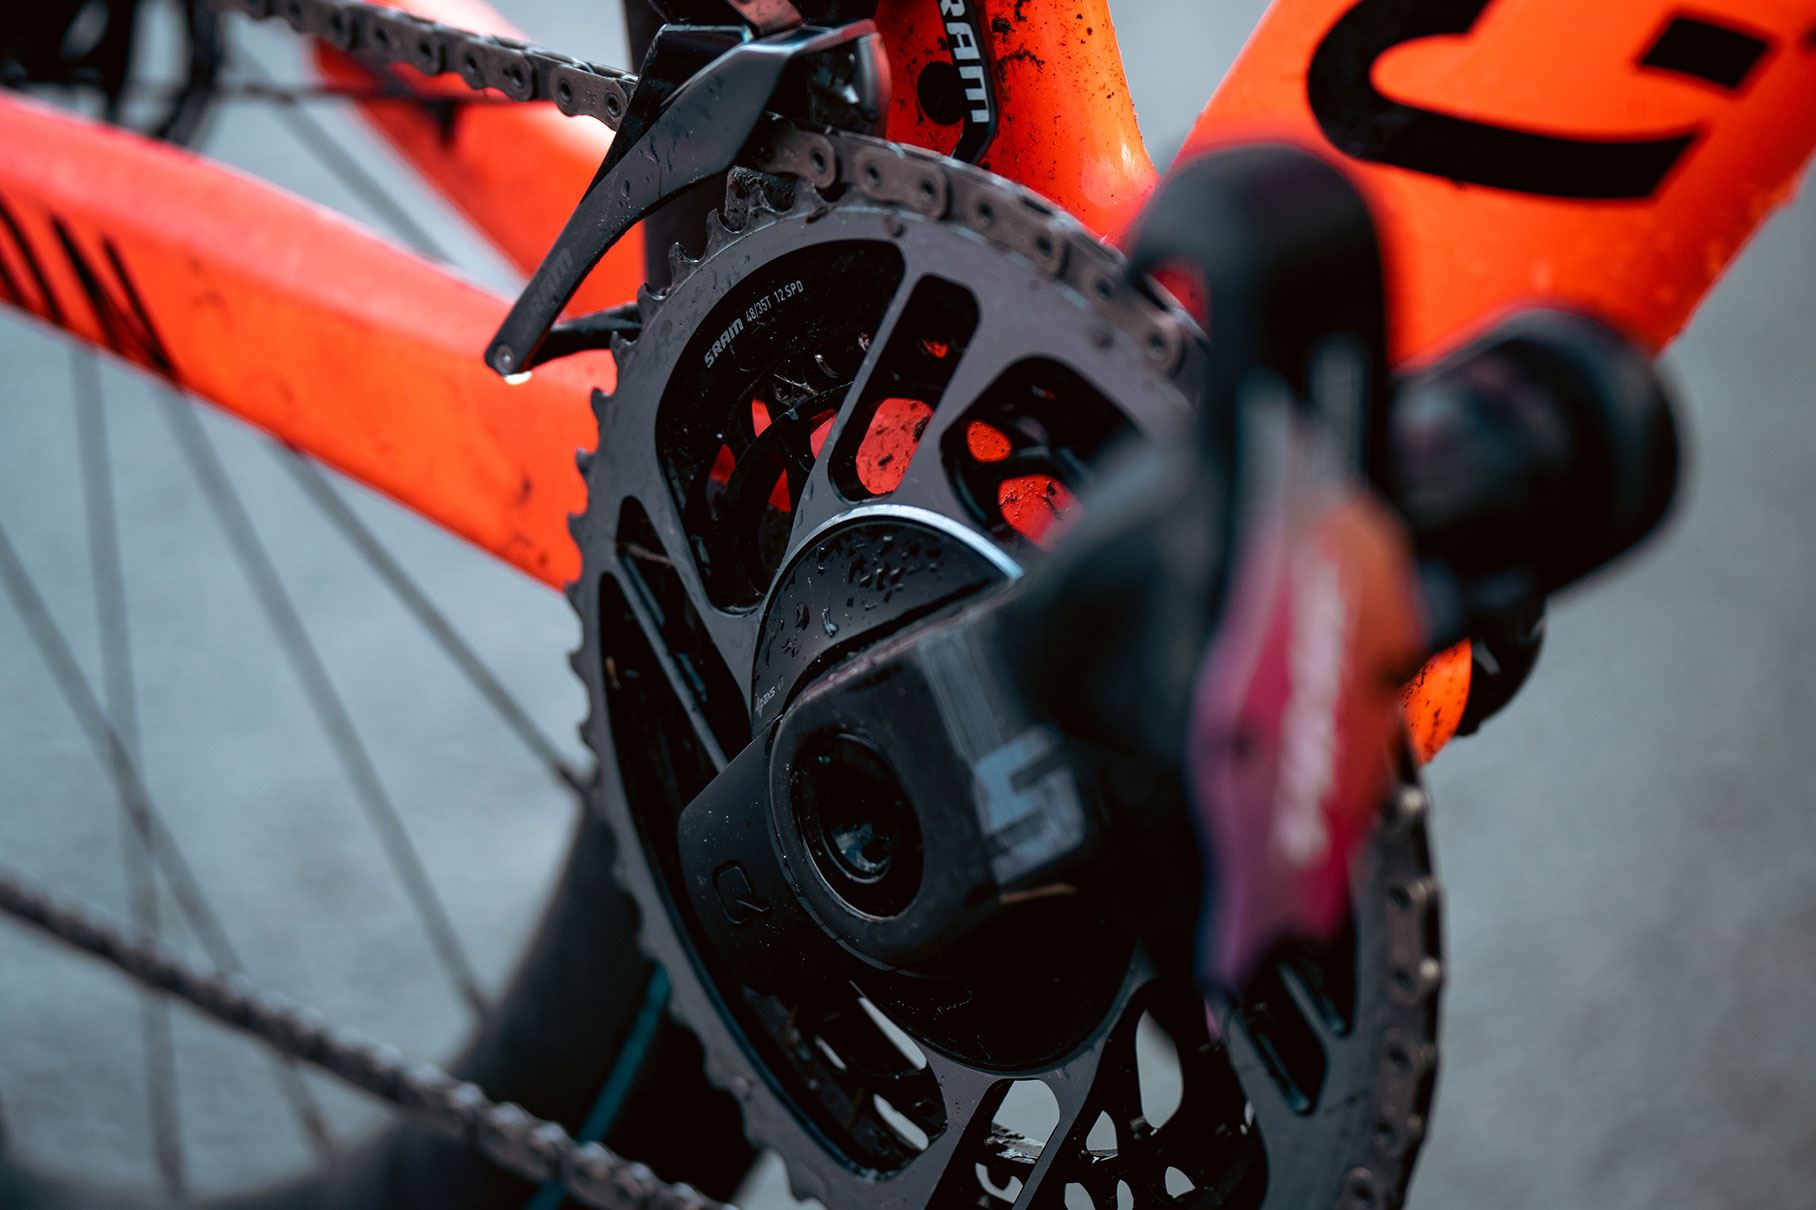 Kasia's 48/35 chainring choice for Flanders